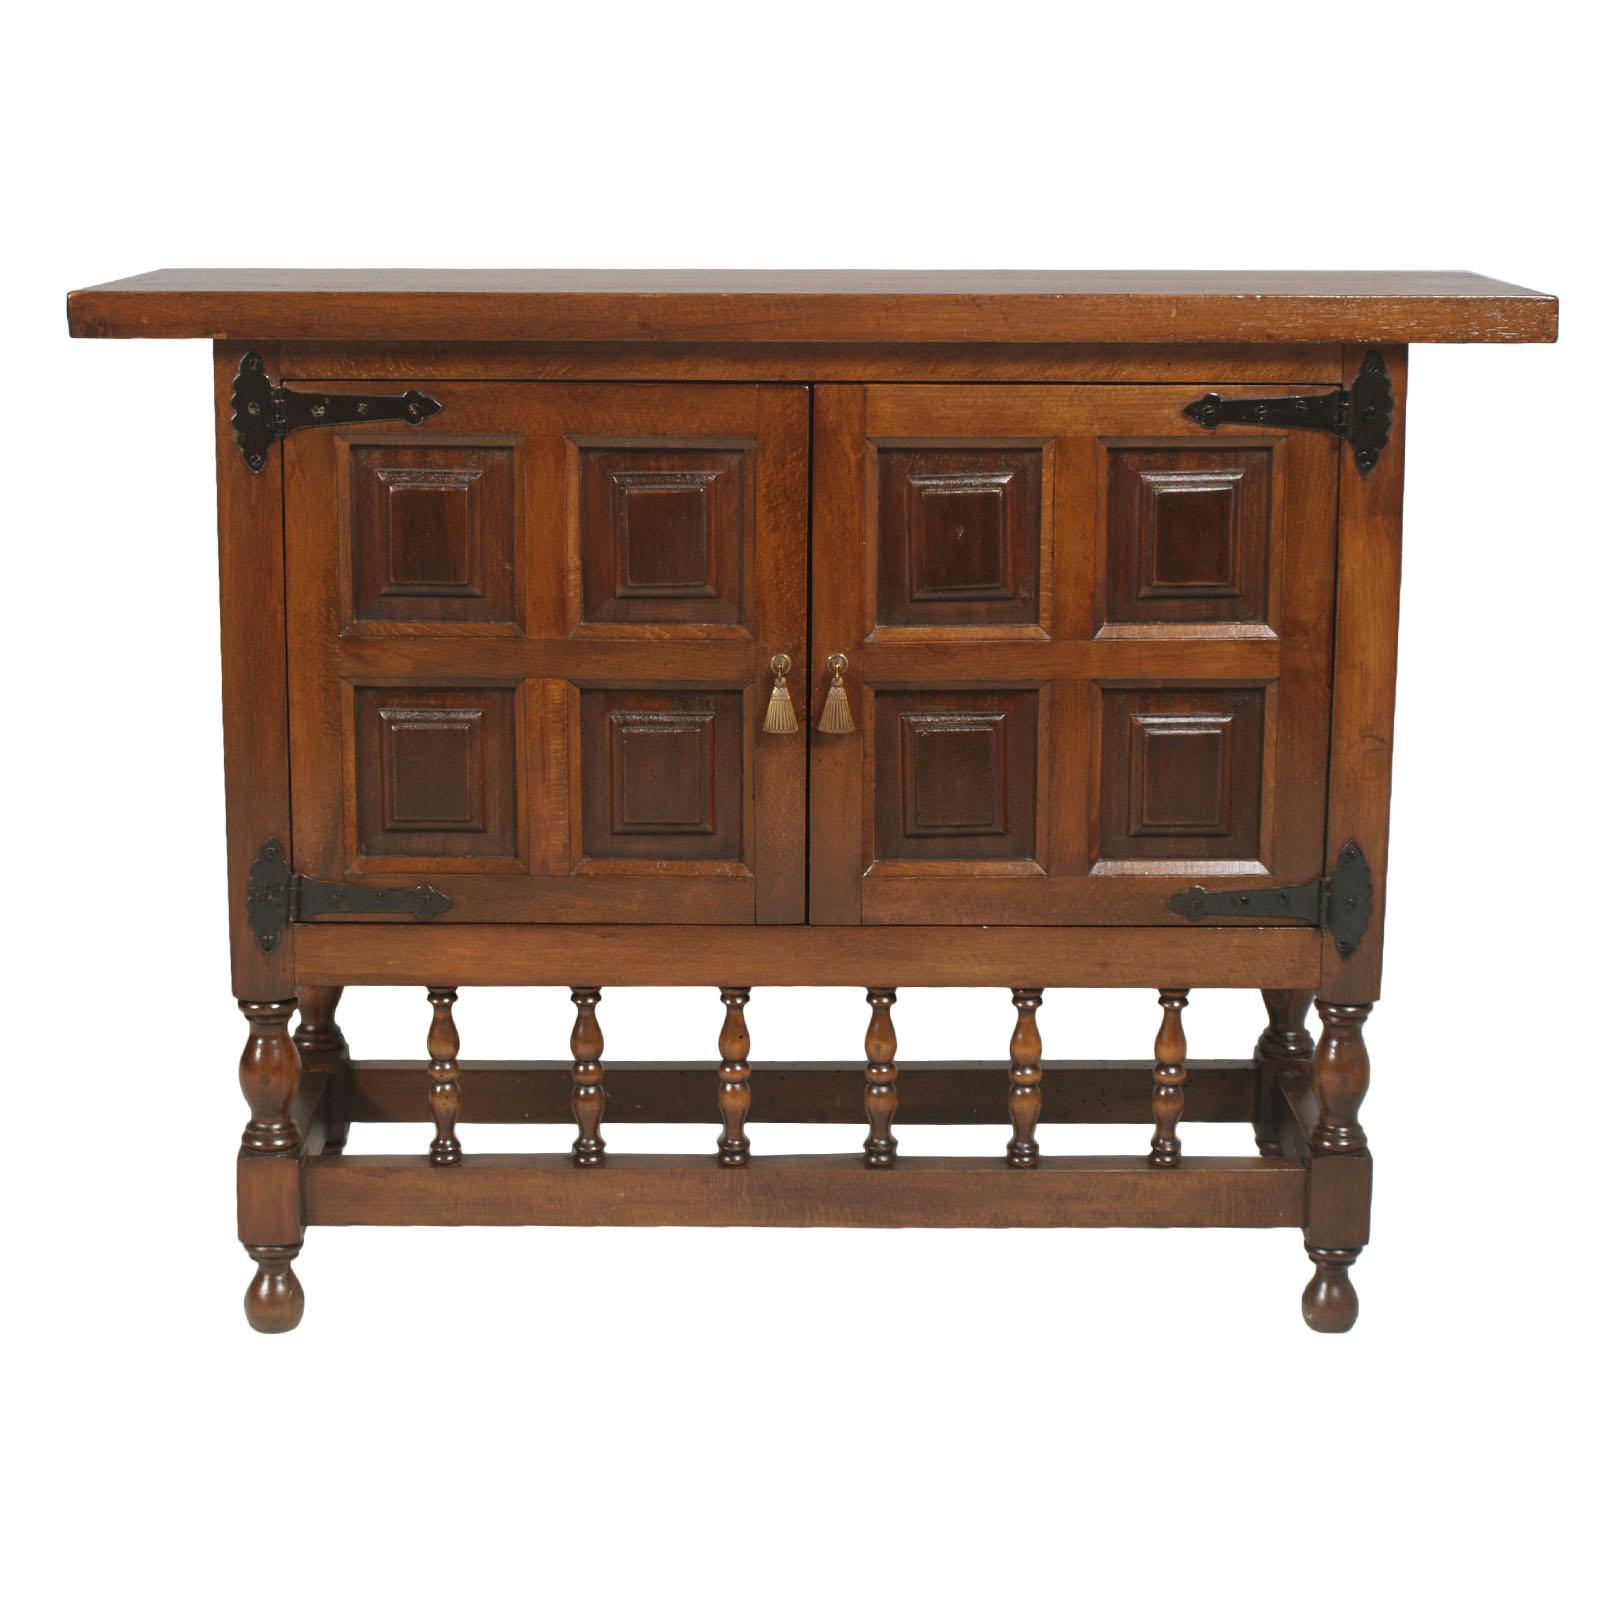 Cabinet, console, buffet, Spanish Colonial, restored and finished to wax
With turned legs, Ashlar doors and classic iron hinges, circa 1910s.

Measure cm: H 75, W 100, D 30.